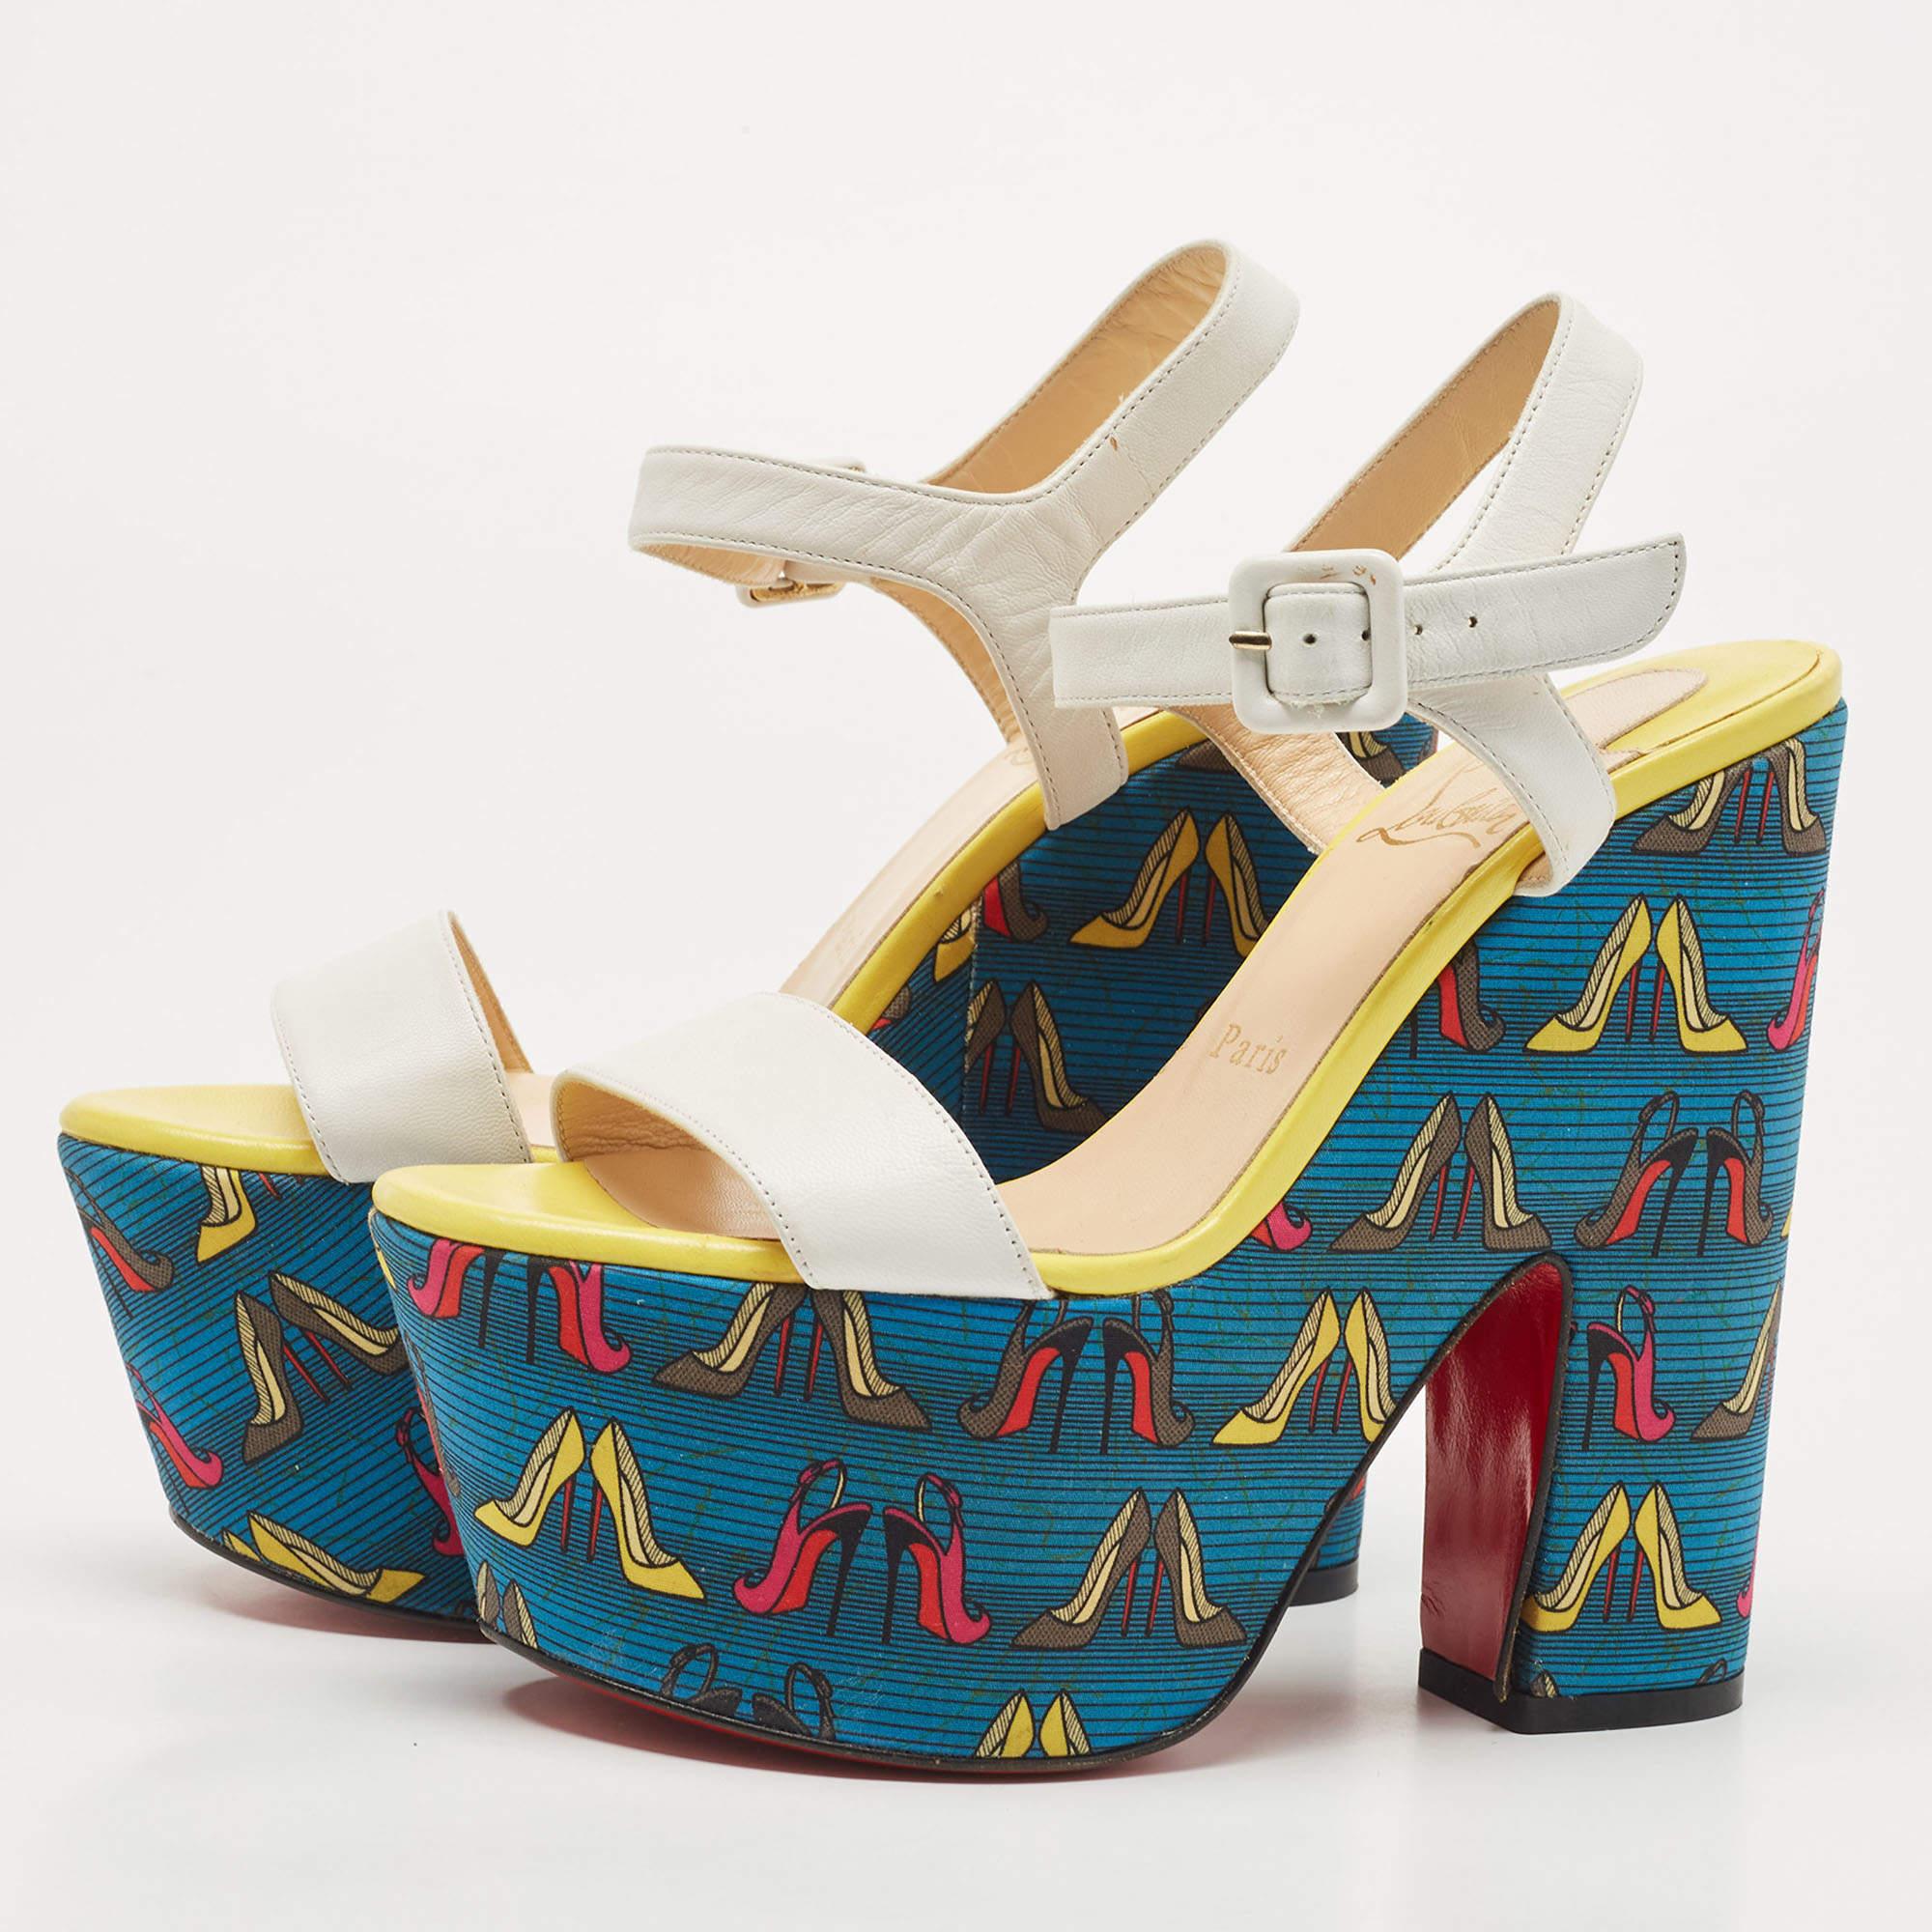 Wear these Christian Louboutin sandals to spruce up any outfit. They are versatile, chic, and can be easily styled. Made using quality materials, these sandals are well-built and long-lasting.

